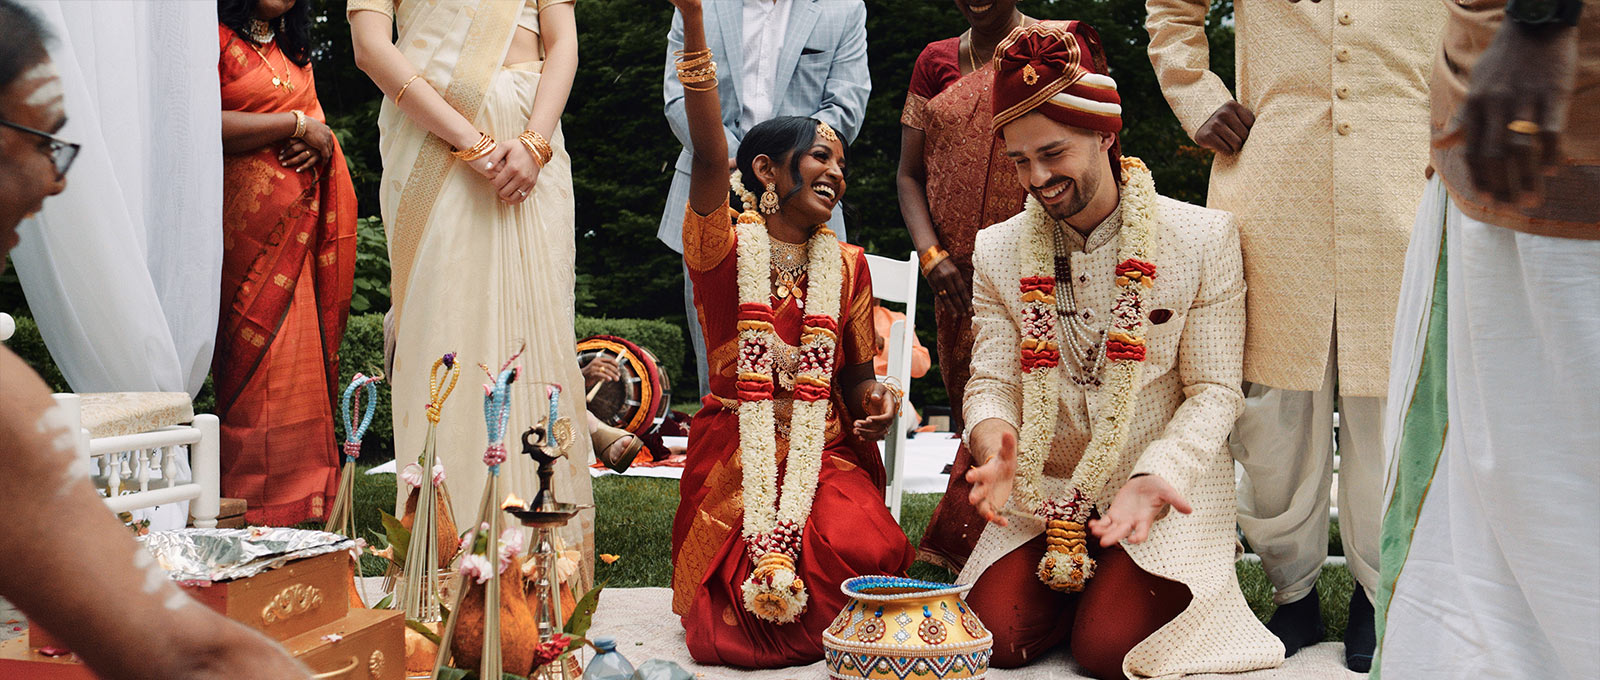 Candid moment of laughter between a bride and groom during their traditional outdoor Hindu ceremony.